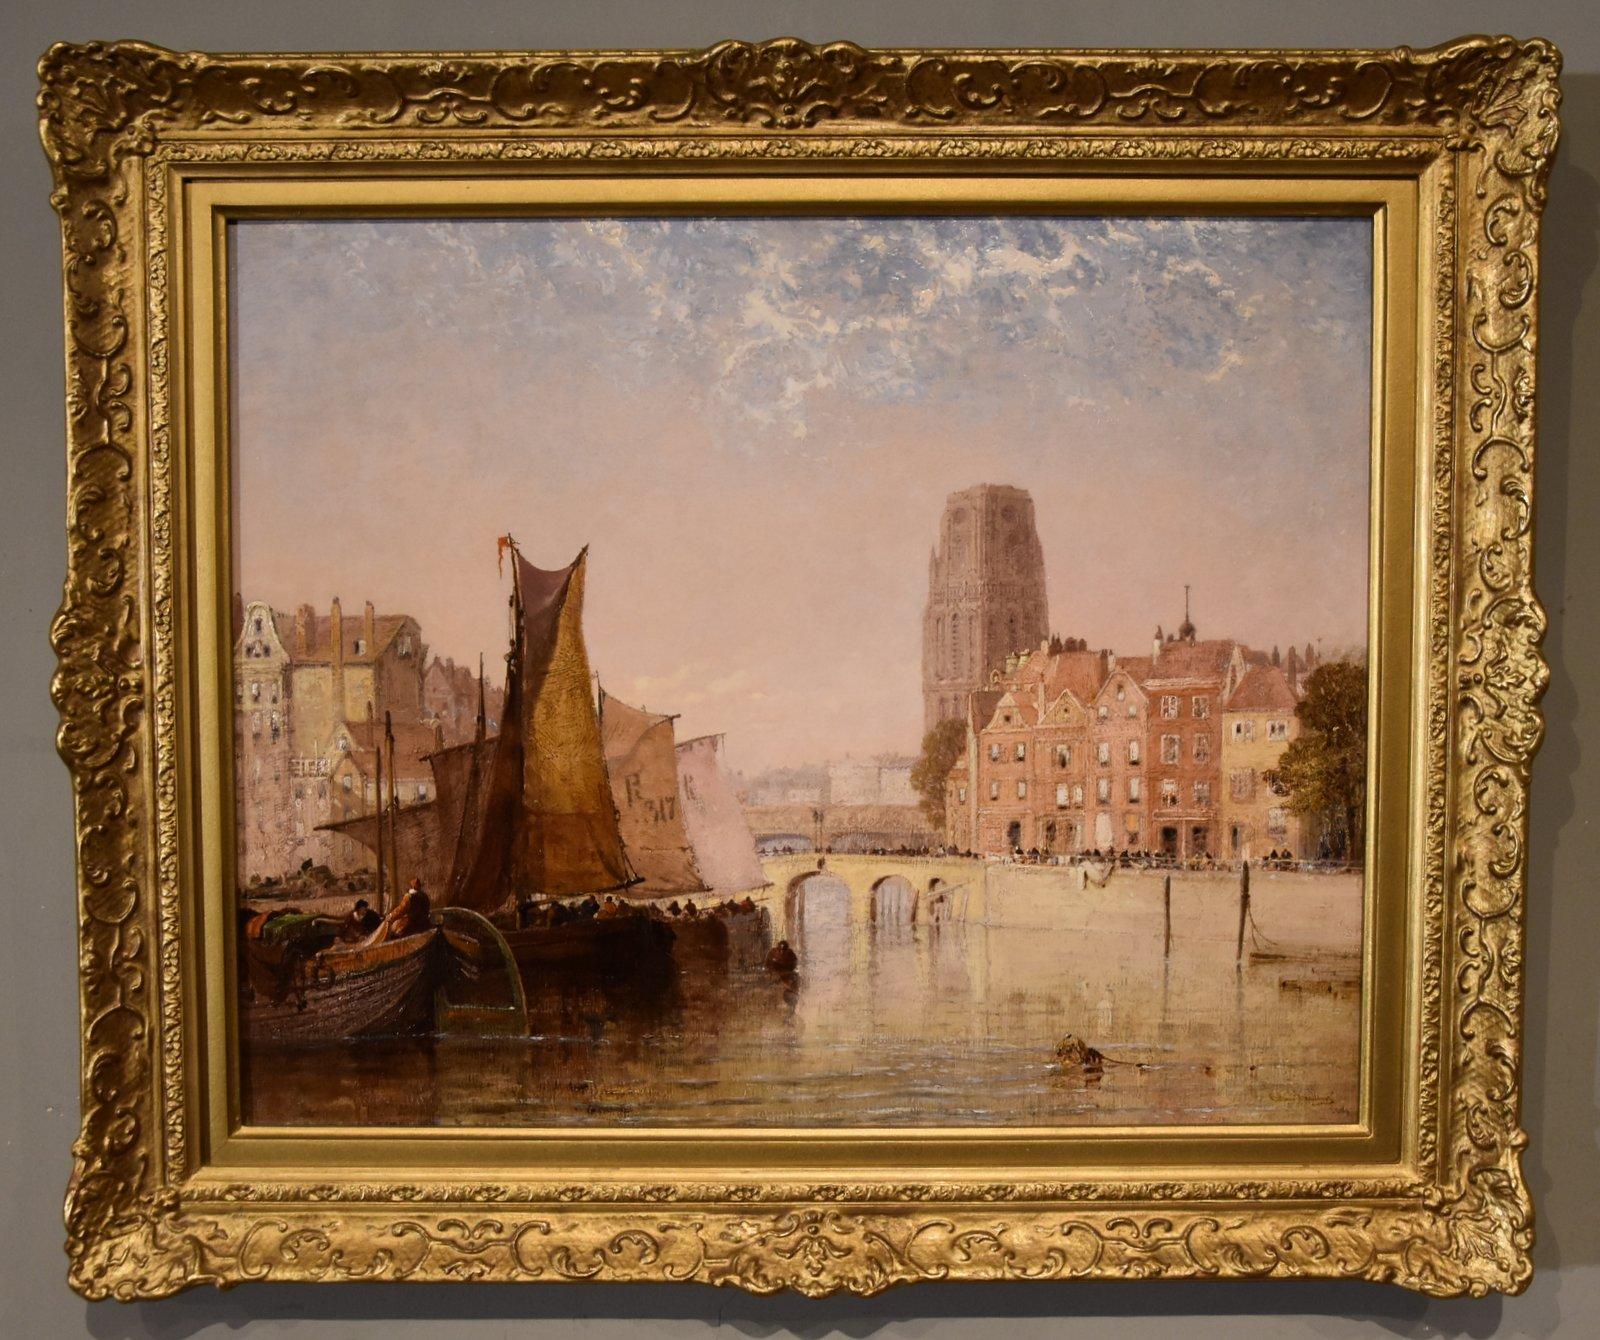 Oil Painting by Arthur Joseph Meadows "Rotterdam" 1843- 1907 Painter of townscapes and coastal marines, regular exhibitor at the Royal academy, society and British Institution Oil on canvas. signed and dated 1883, title verso. Oil on board.